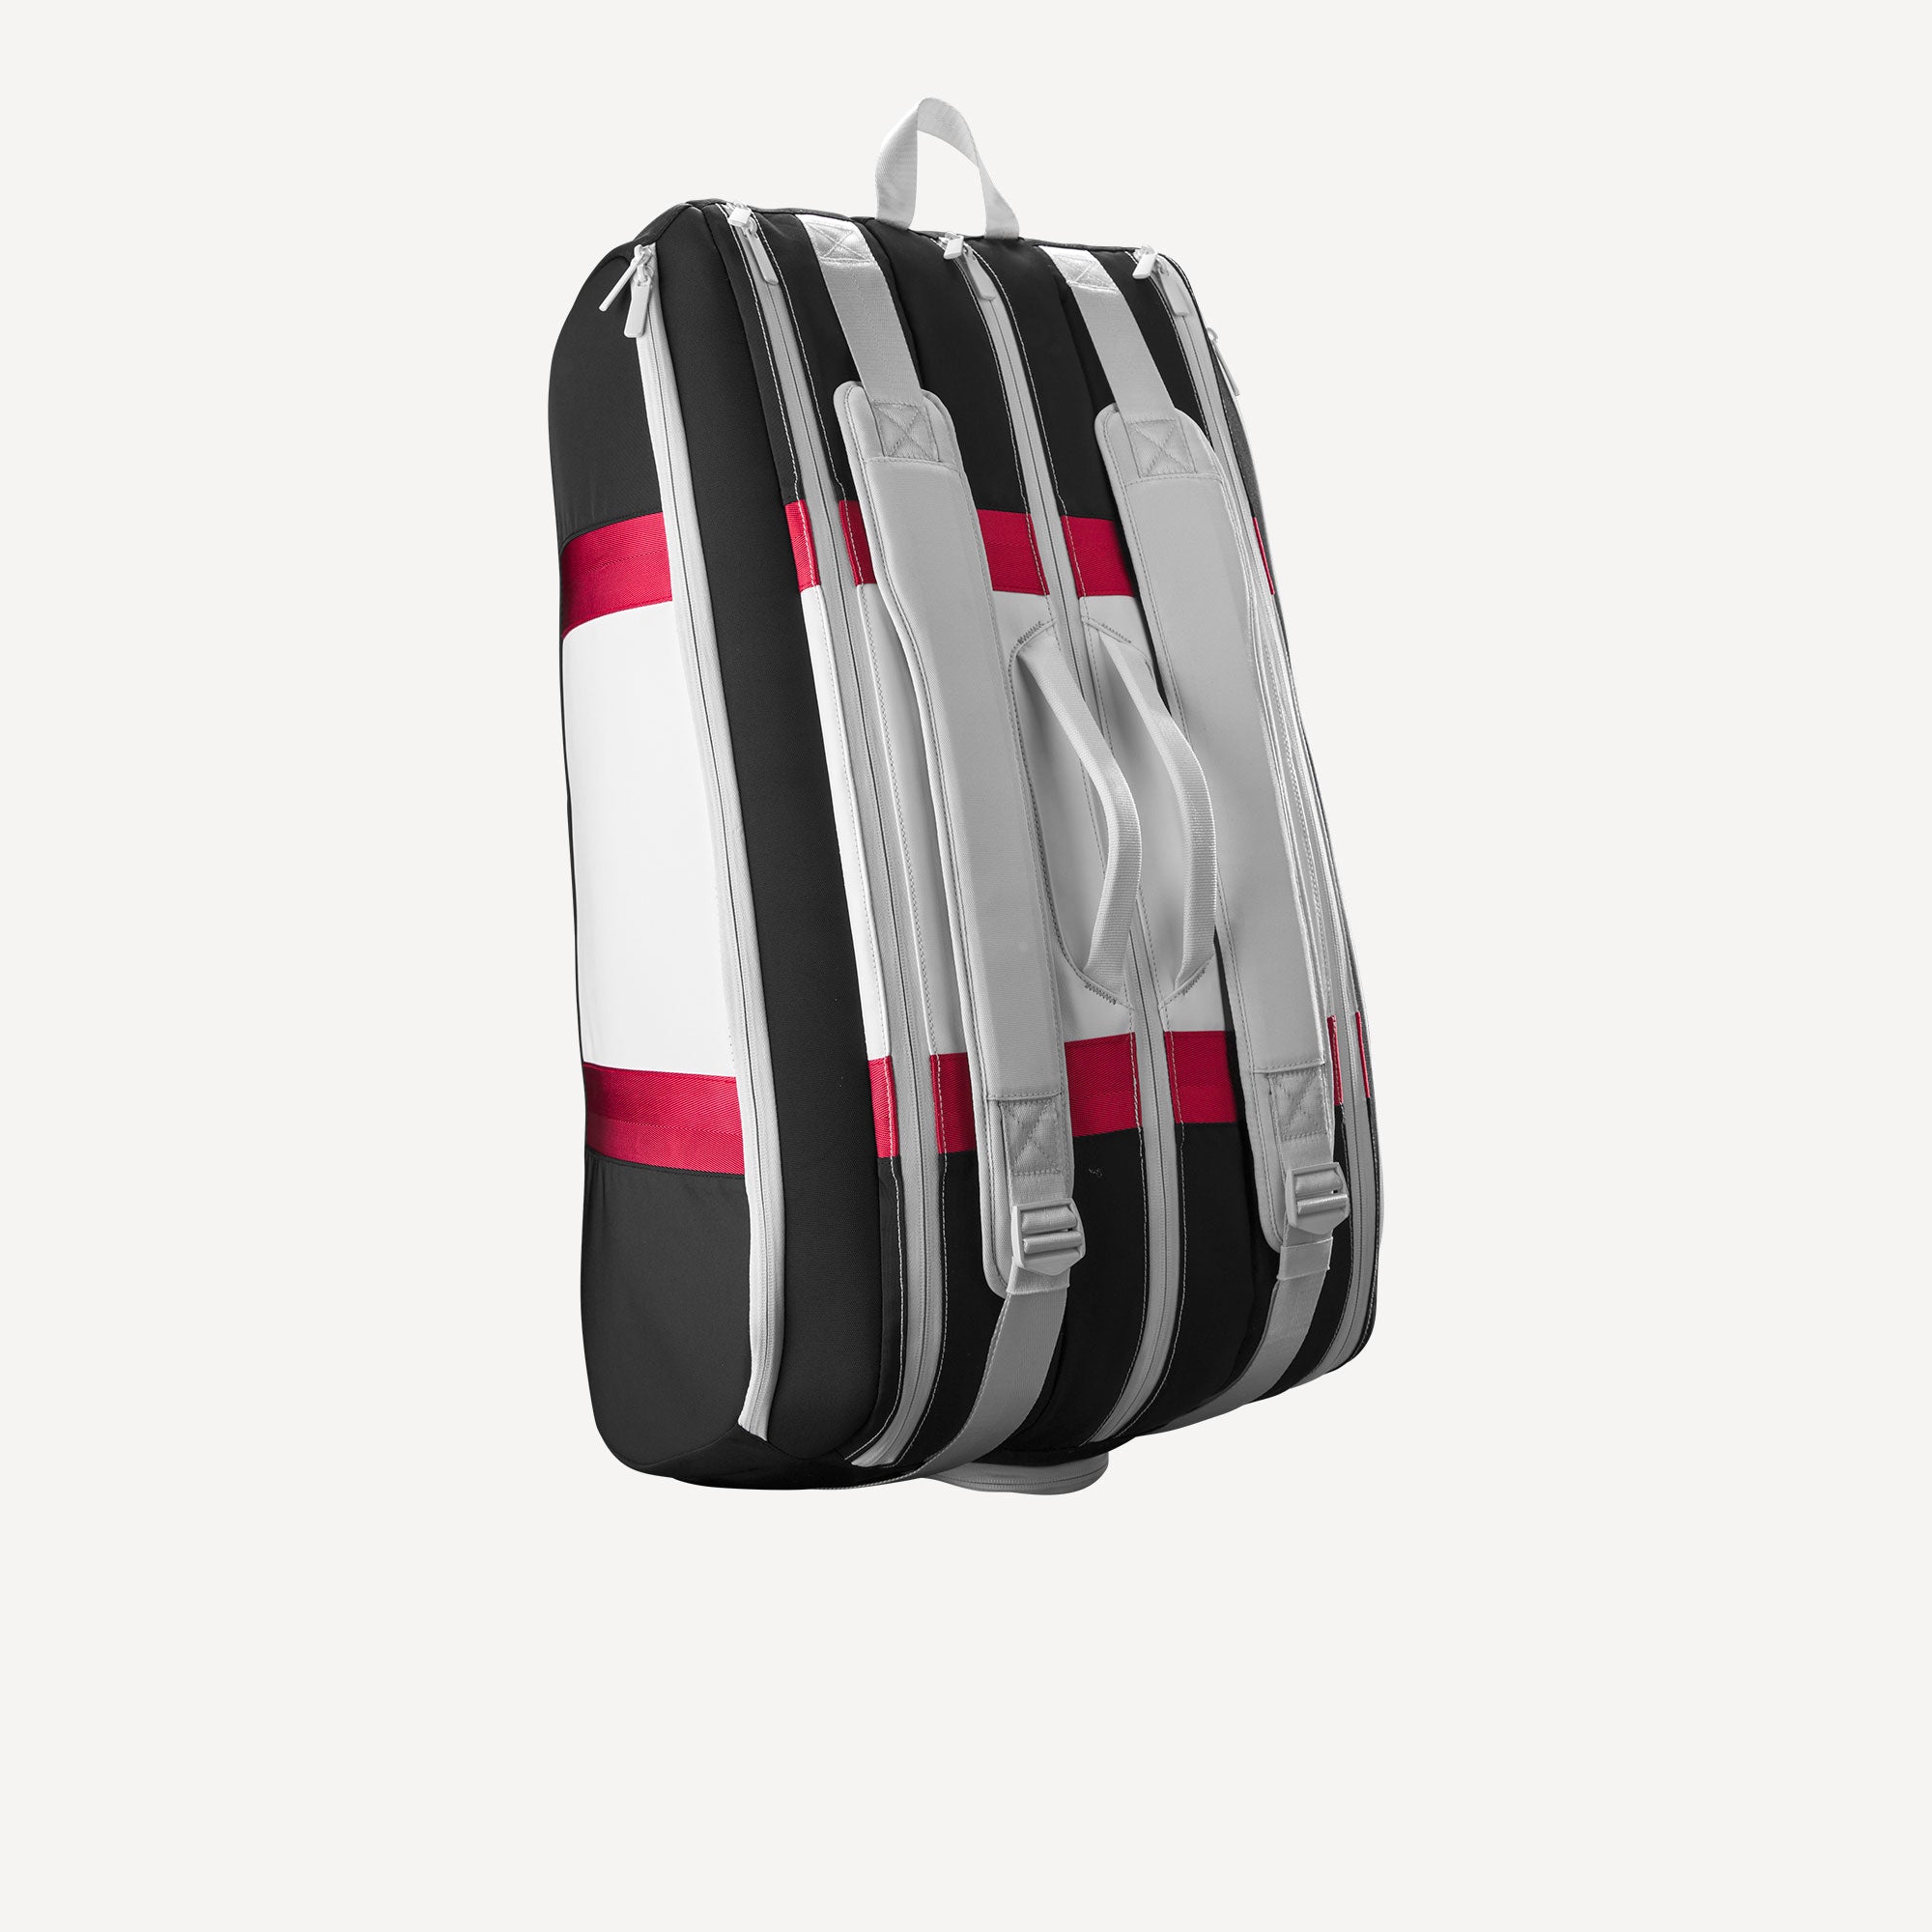 Wilson Courage Collection 15 Racket Tennis Bag - Black/White/Red (3)